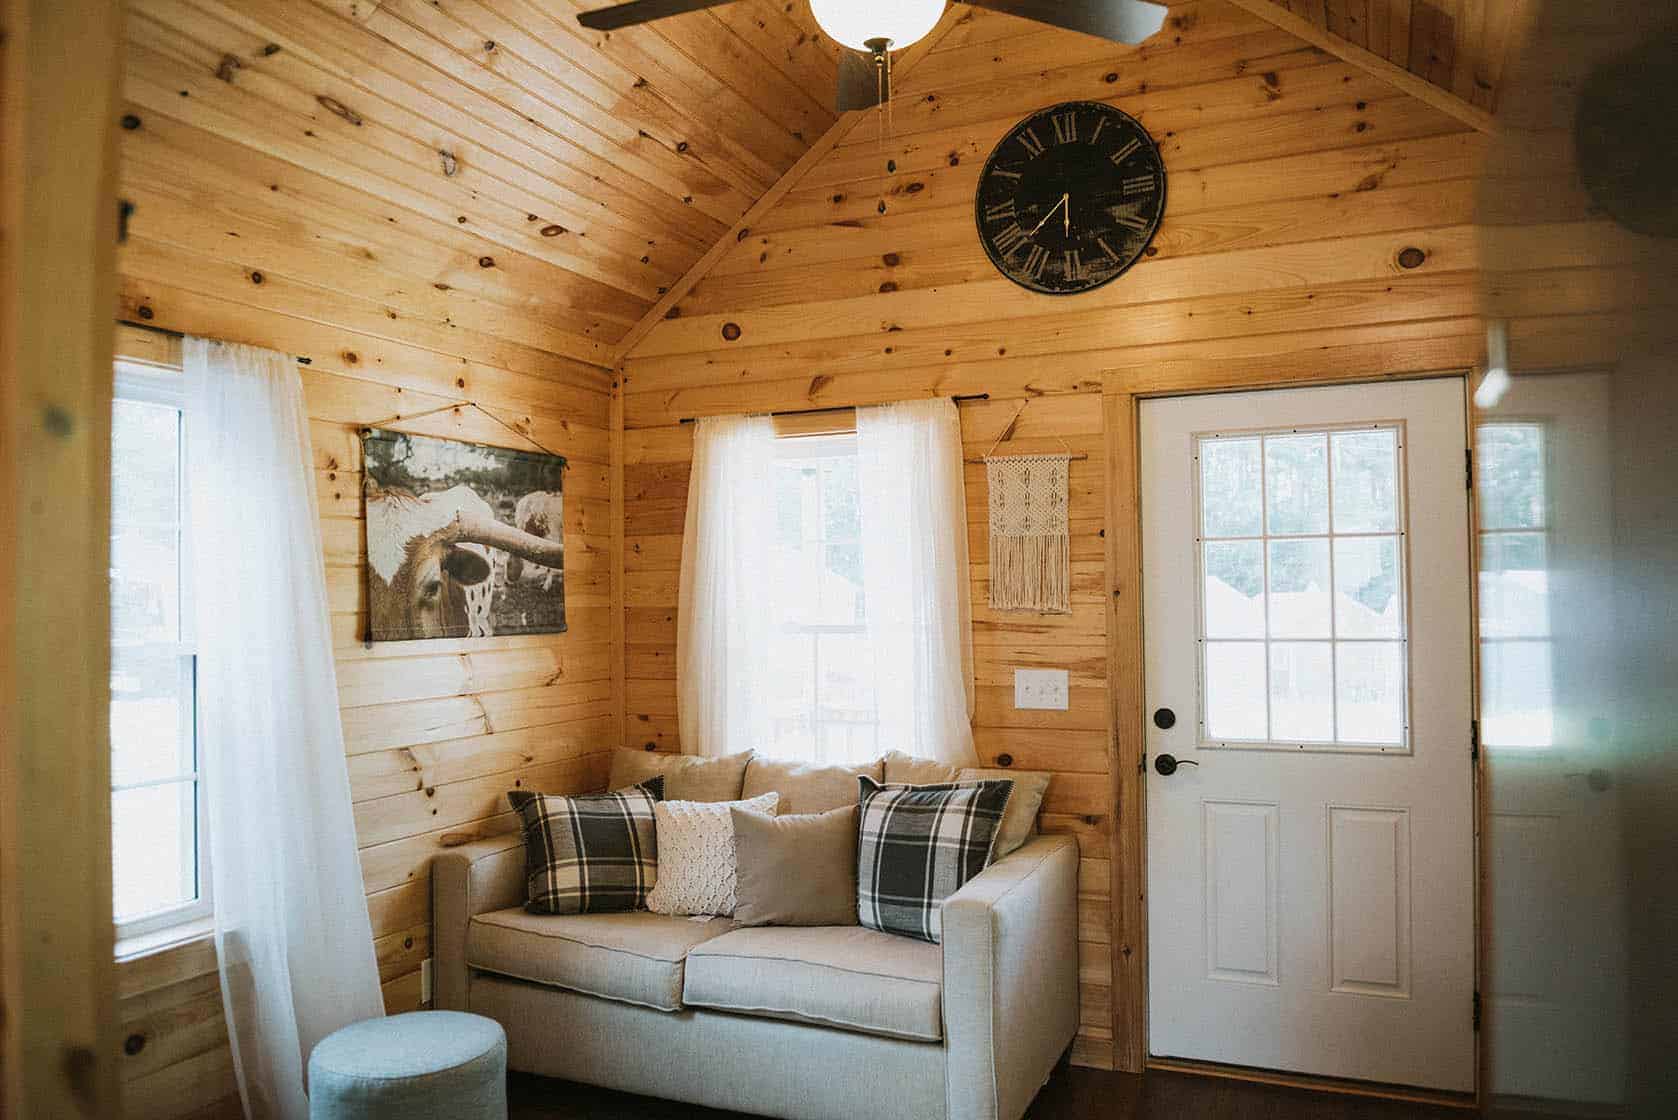 Modular Tiny Log Cabin Living Space with Cozy Interior